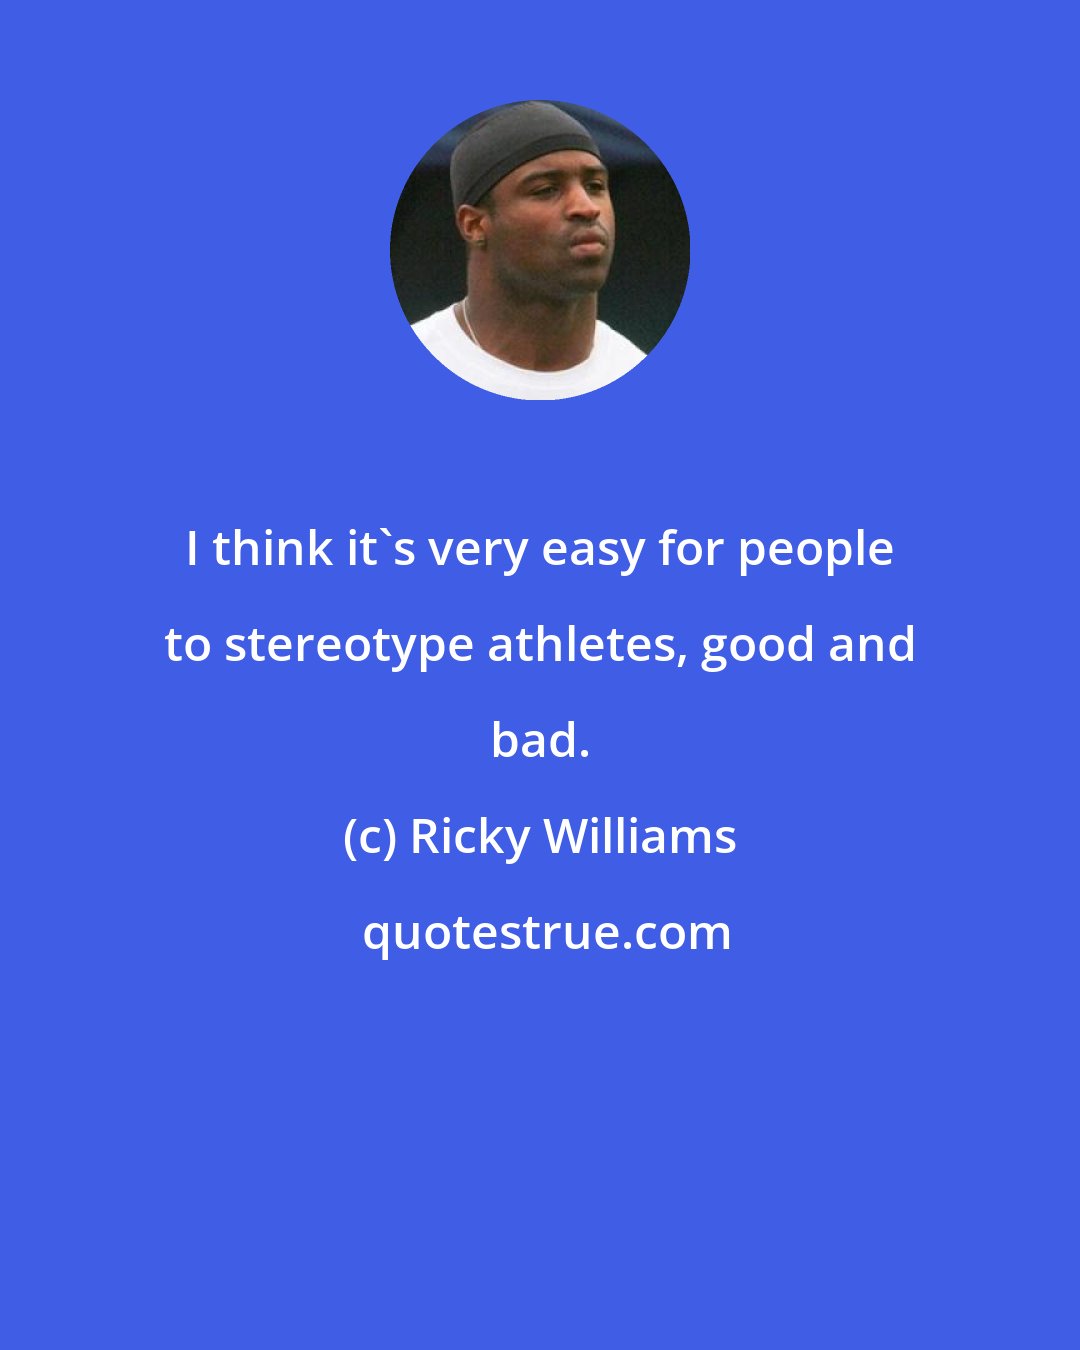 Ricky Williams: I think it's very easy for people to stereotype athletes, good and bad.